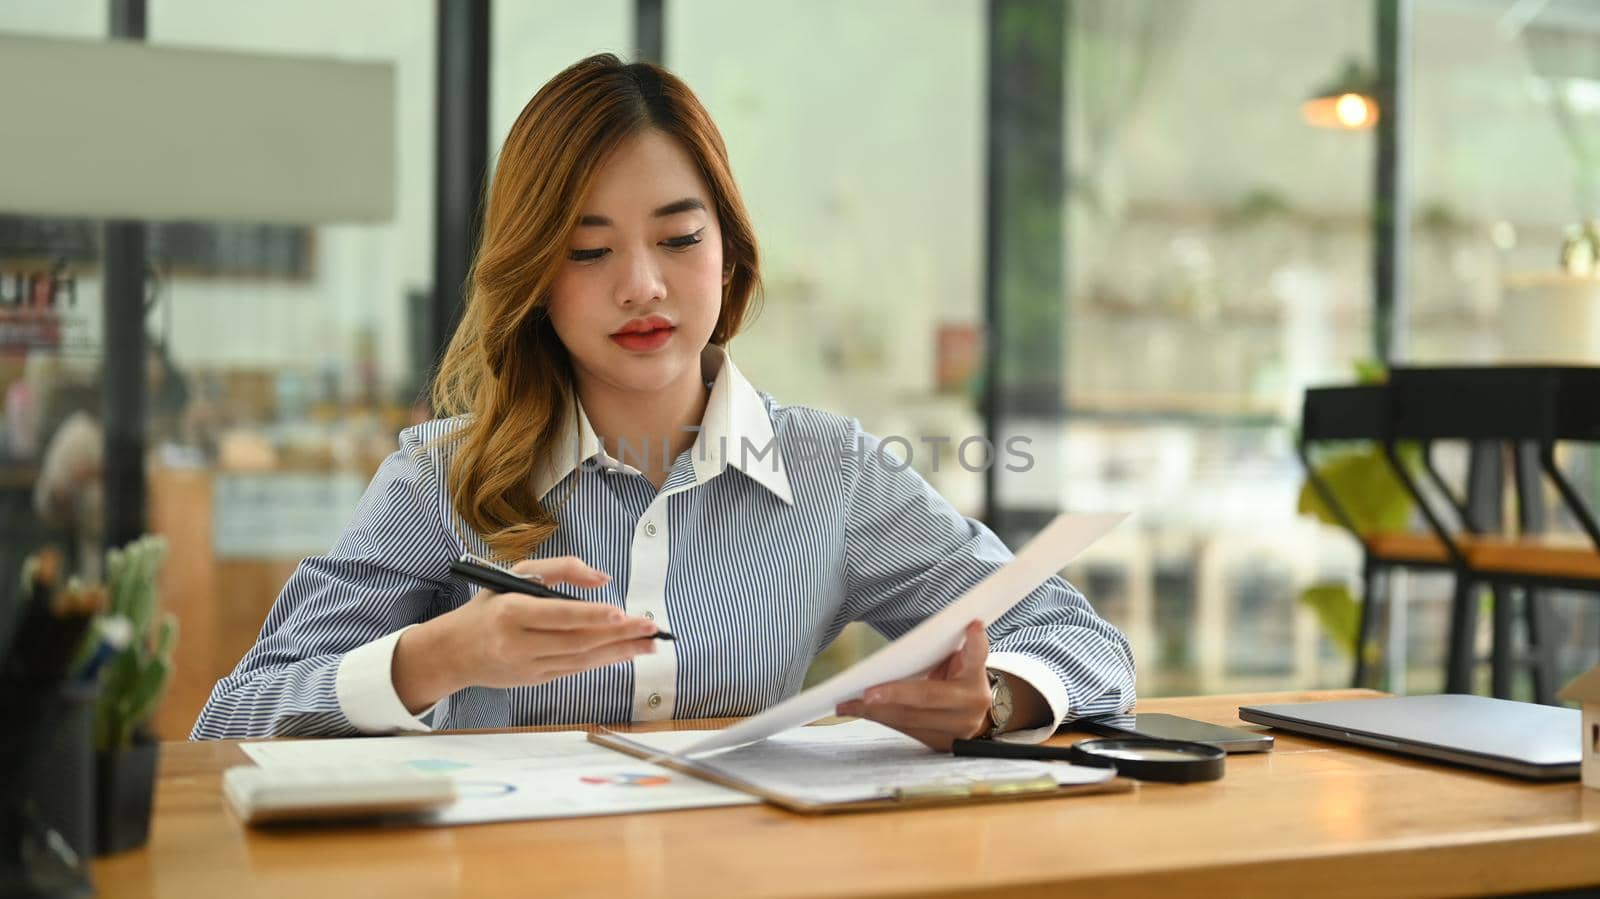 Young female accountant using calculator and examining the numerical data on financial document by prathanchorruangsak